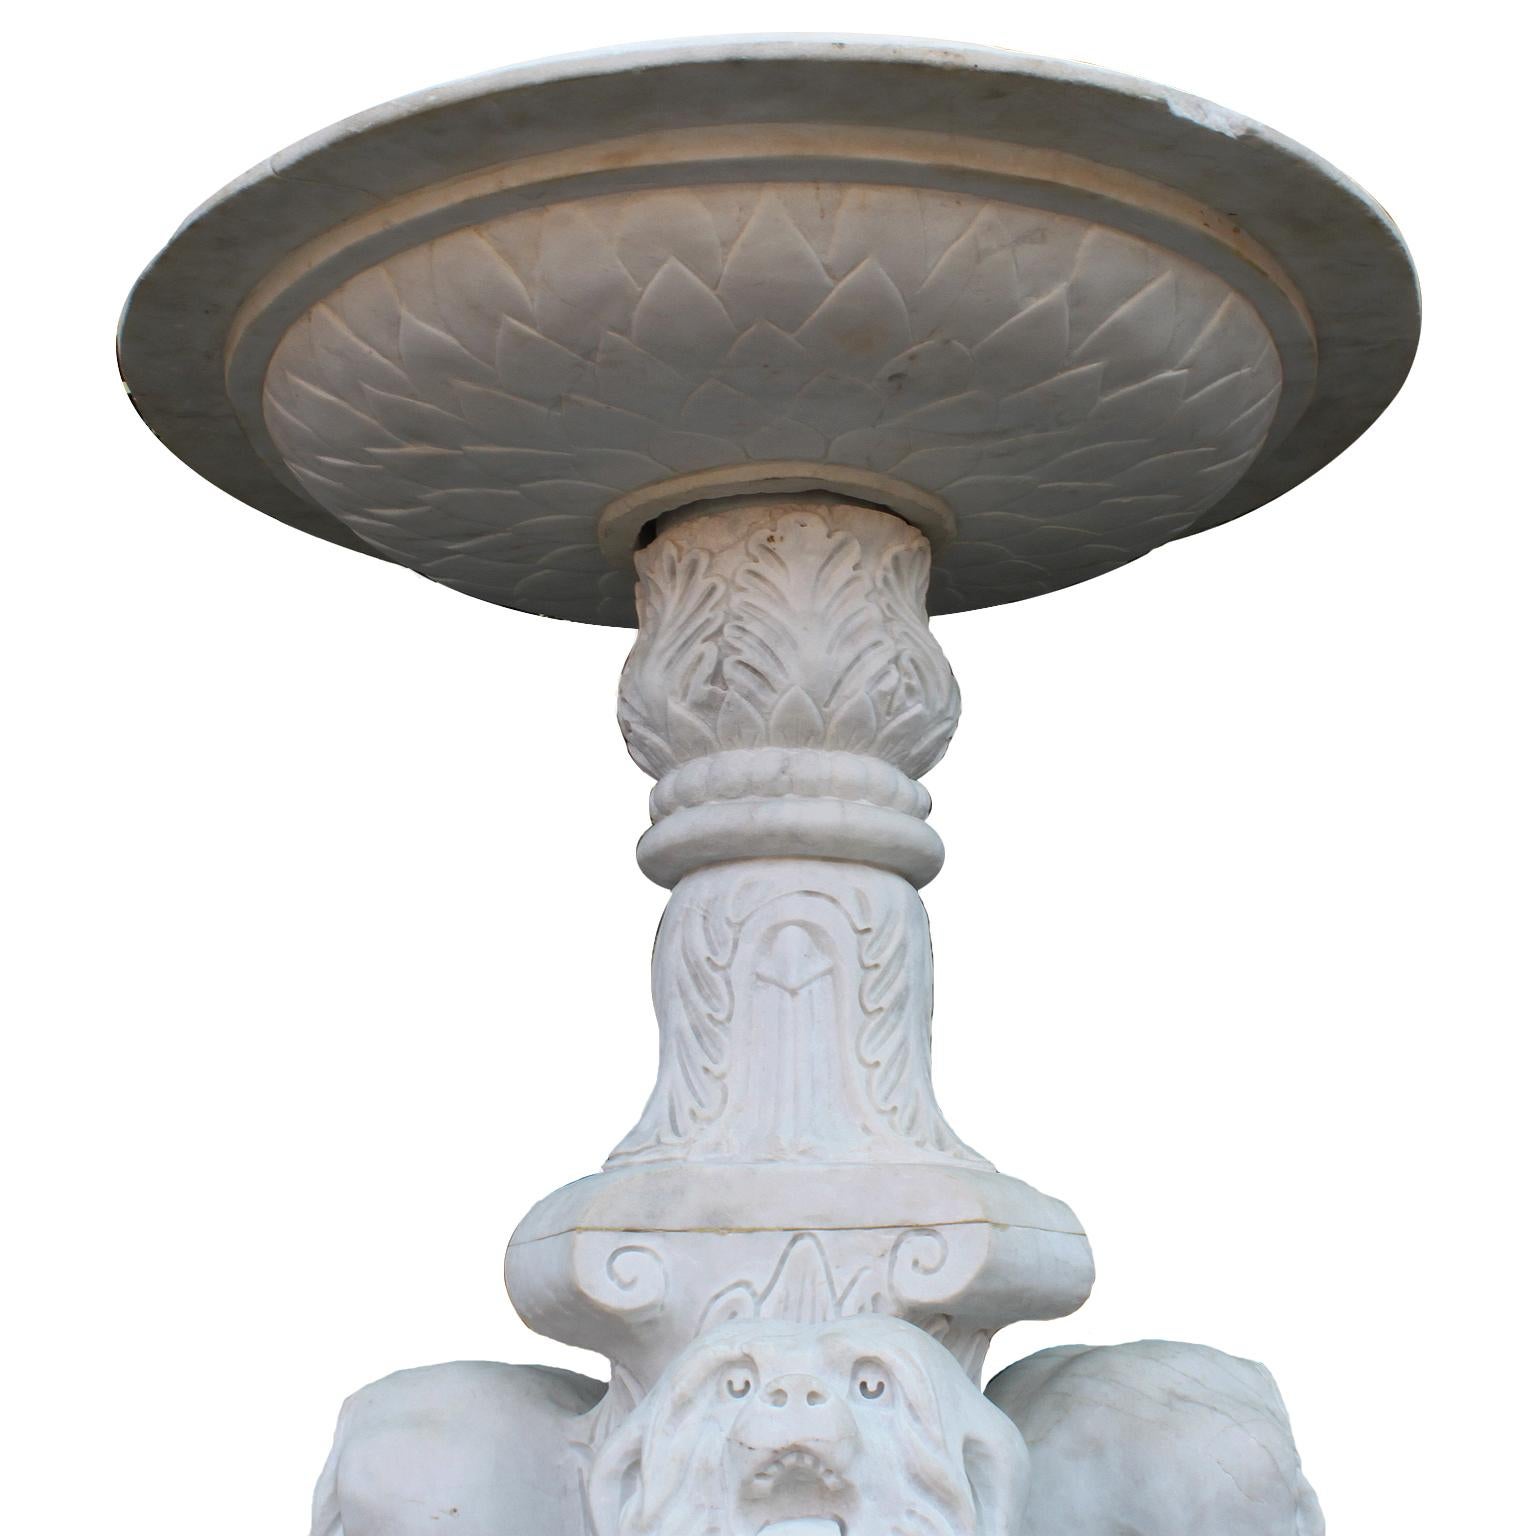 Baroque Revival Whimsical English 19th-20th Century White Marble Figural Outdoor Dog Fountain For Sale